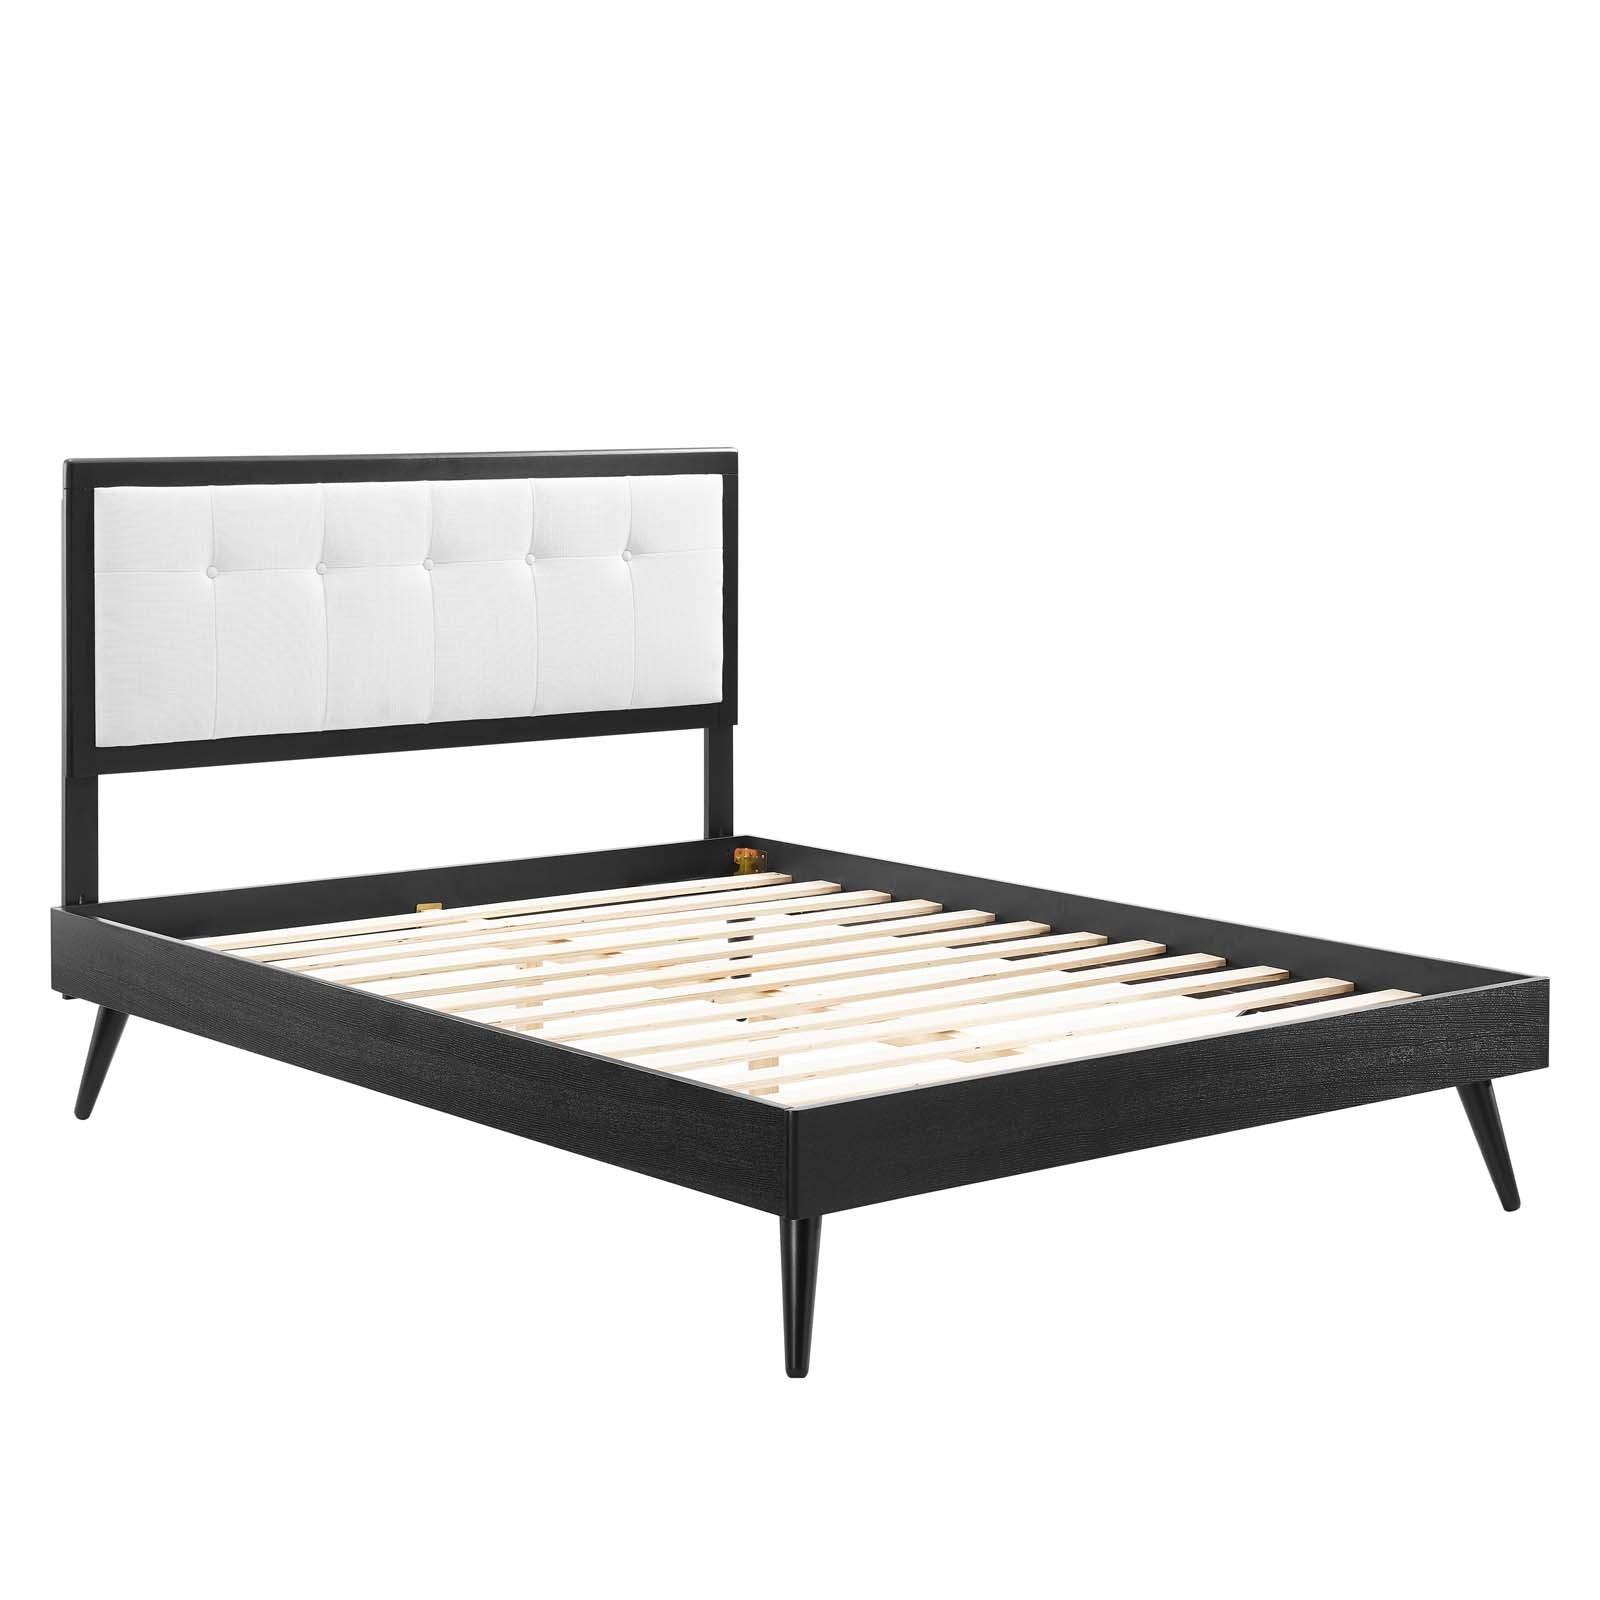 Modway Beds - Willow Queen Wood Platform Bed With Splayed Legs Black White